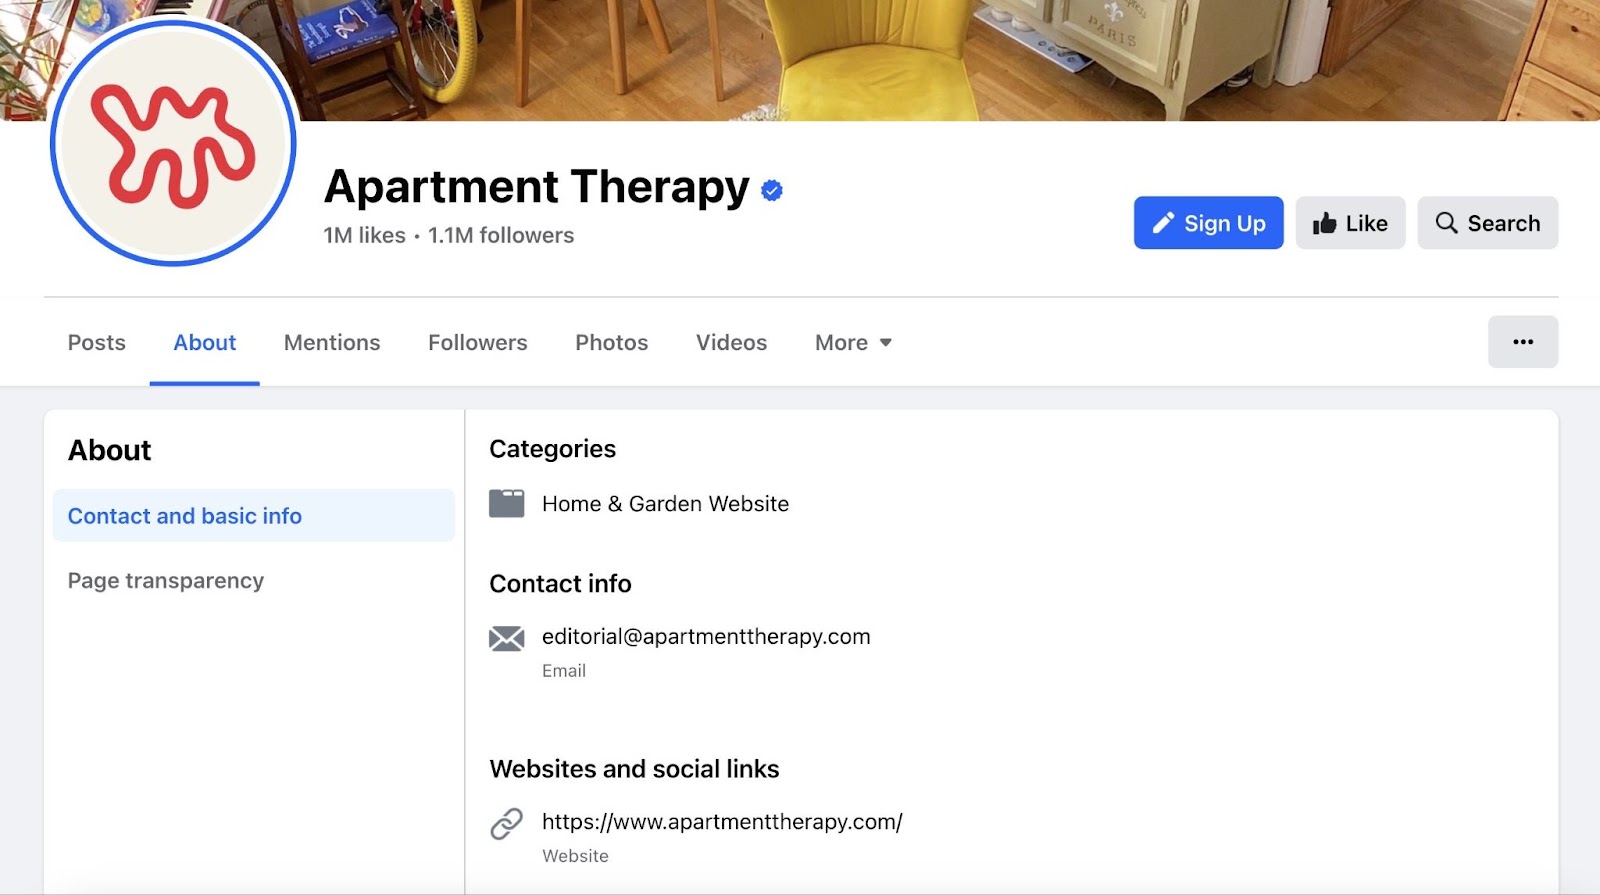 "Apartment Therapy" Facebook profile